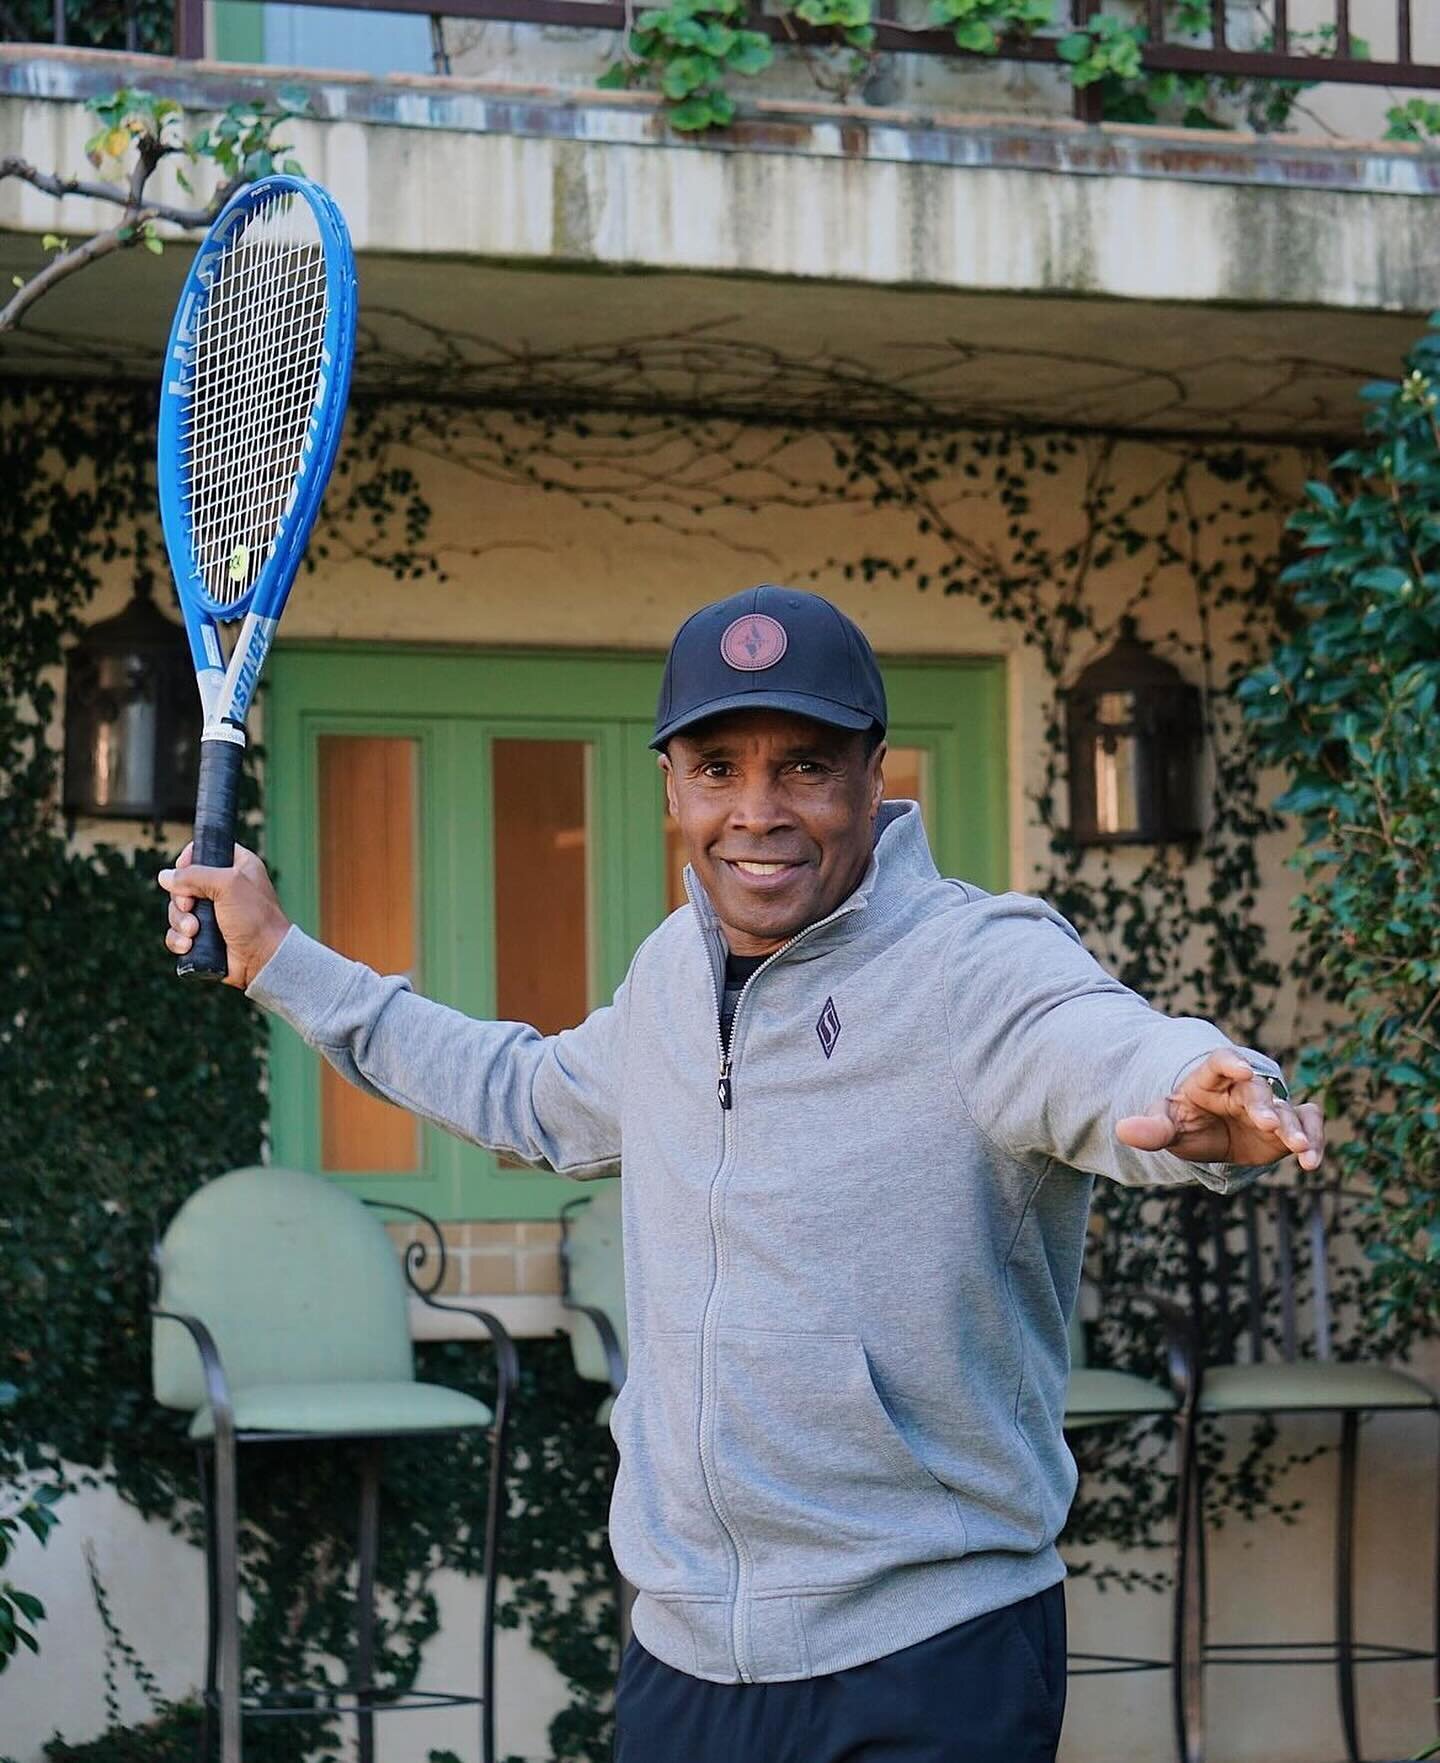 Comfort plays a big role in achieving peak performance whether on the tennis court or lounging around. Kudos to @Skechers for keeping me stylishly comfortable.

#SkechersAmbassador #ComfortResolution2024 #HappyNewYear #SkechersStreet #SkechAir